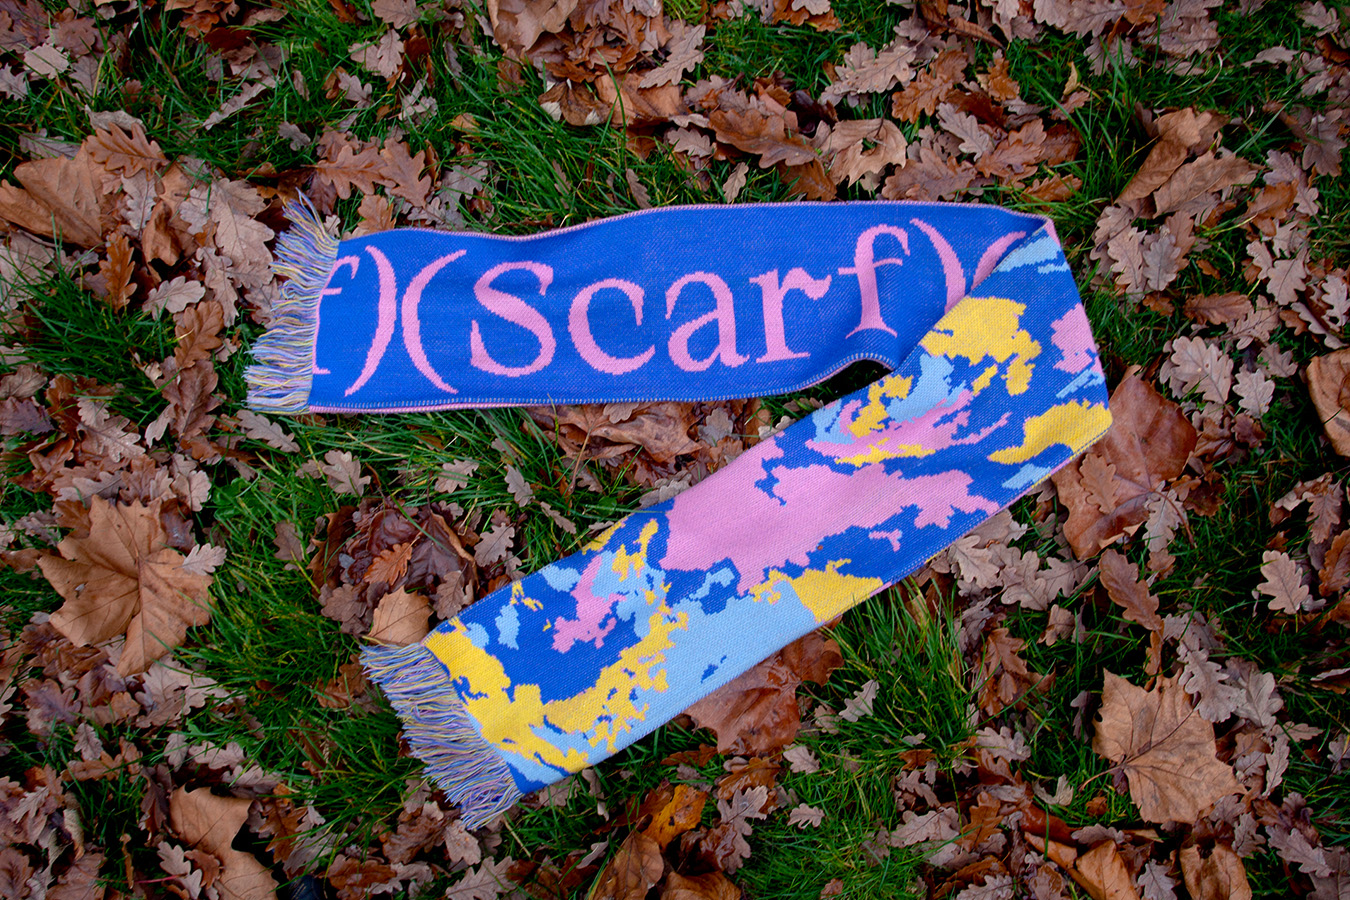 A second image of the scarf, laying on the floor surrounded by scattered leaves